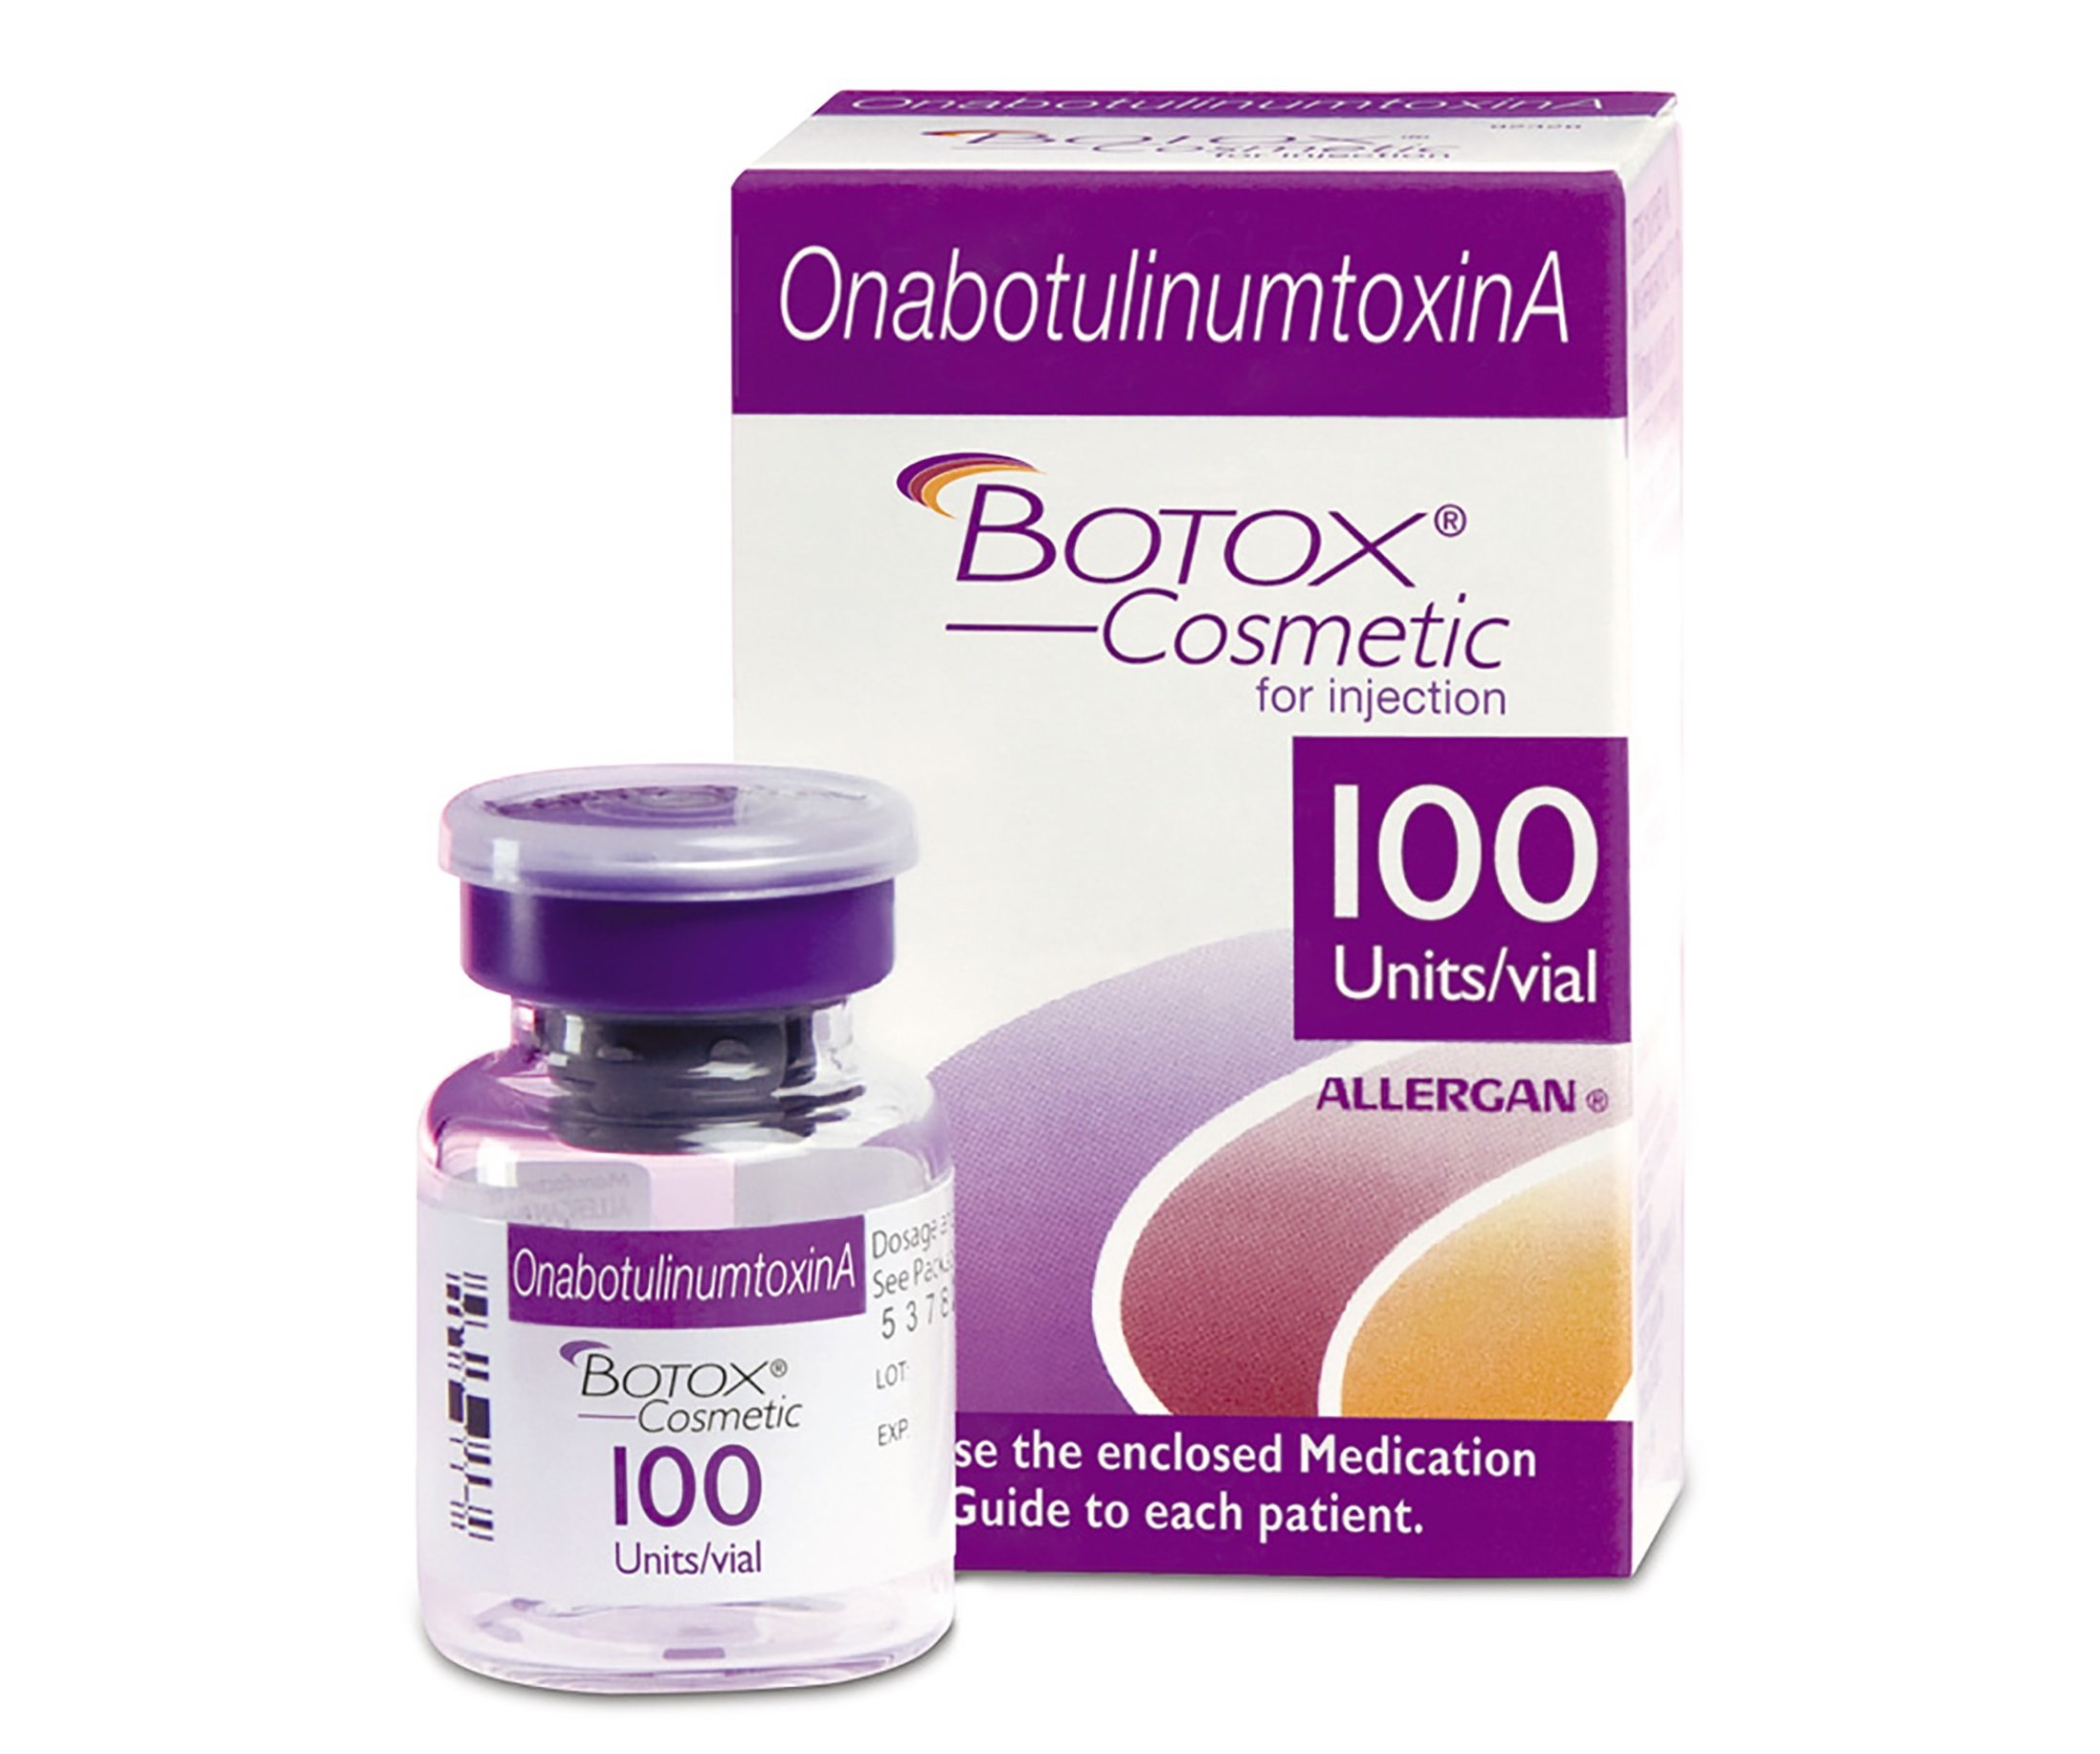 Public Citizen petitions FDA to withdraw ‘misleading’ promotions of AbbVie’s Botox, rivals